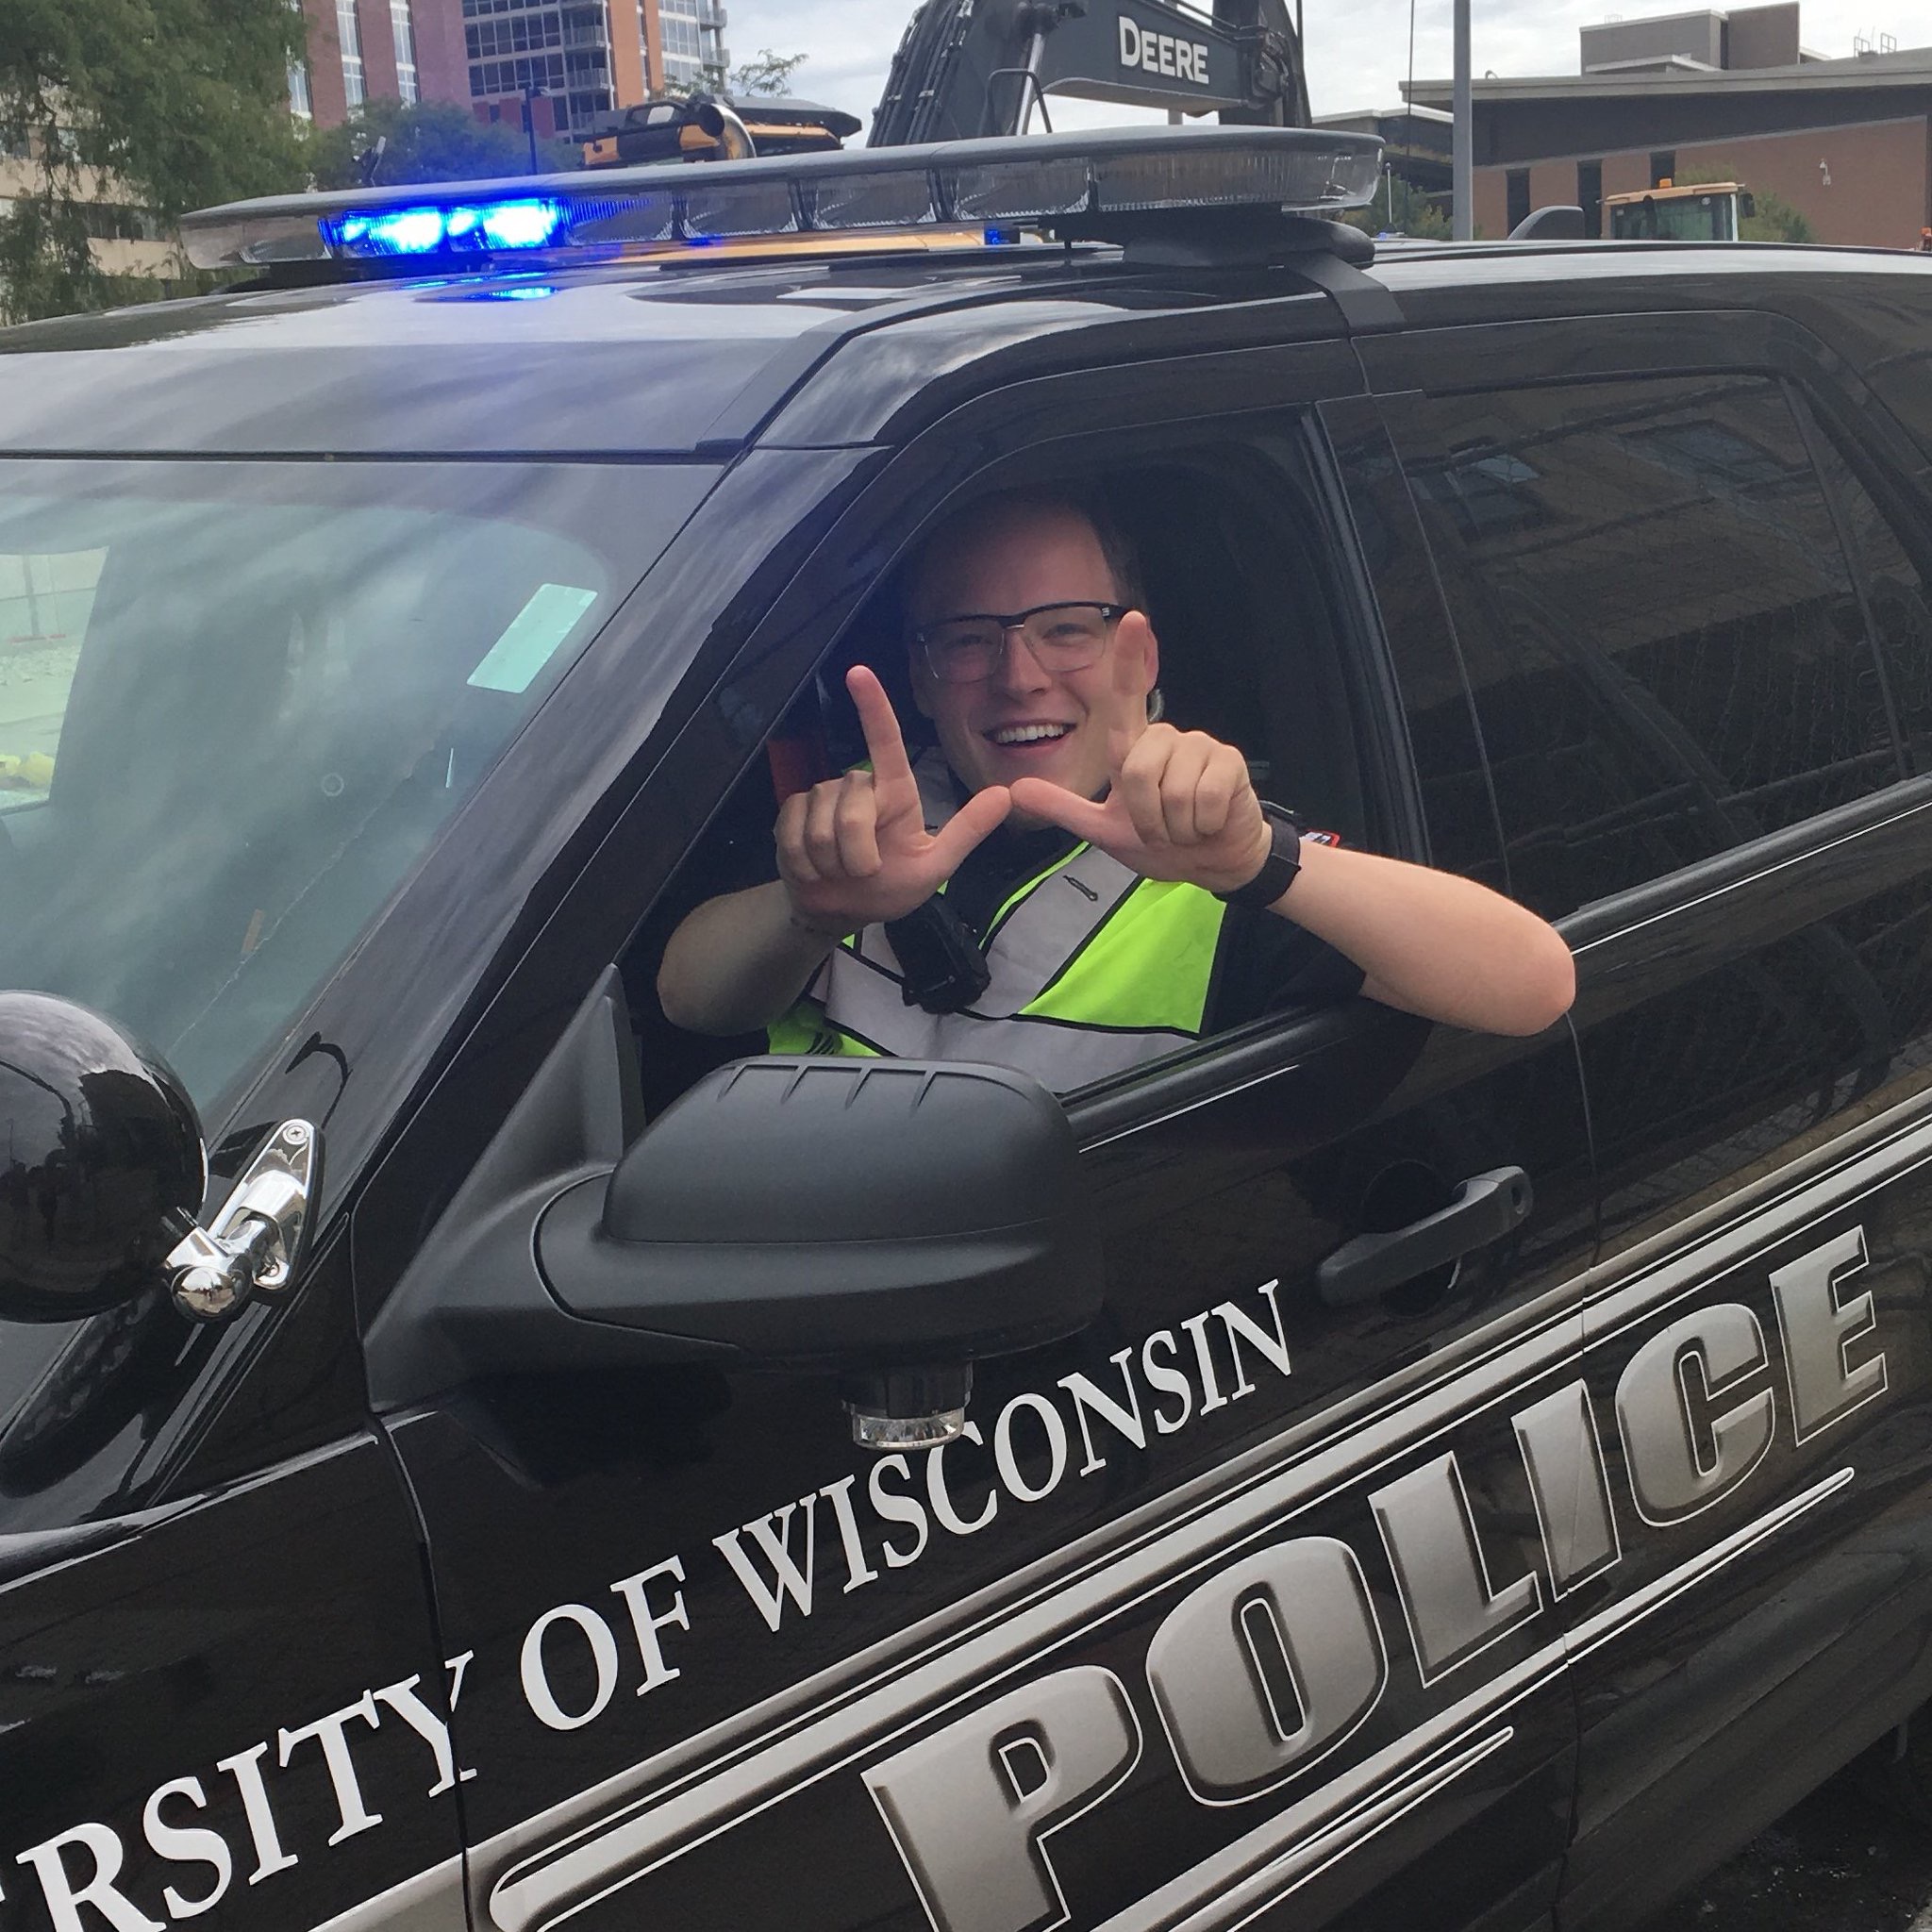 A photo of Officer Jake Lepper sitting in a police squad car and making a 